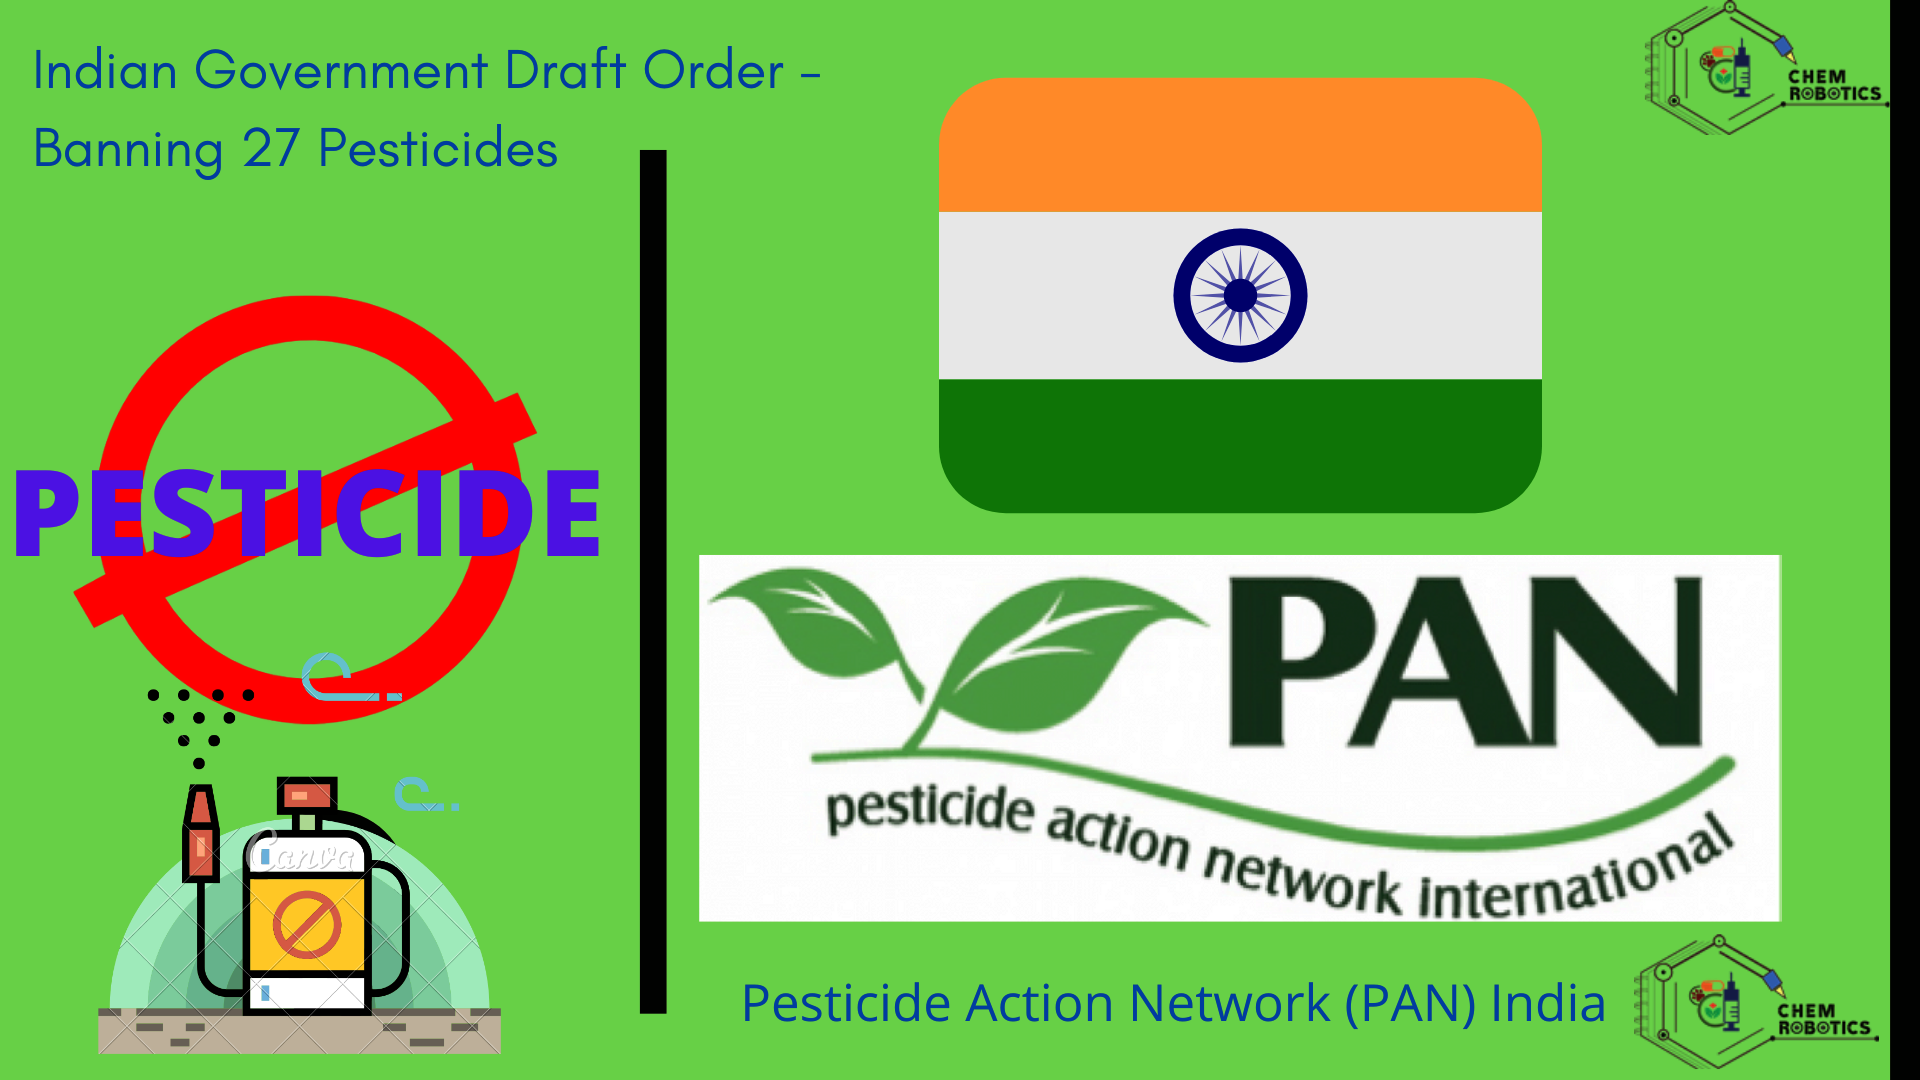 Pesticide Action Network (PAN) India - Banning 27 Pesticides